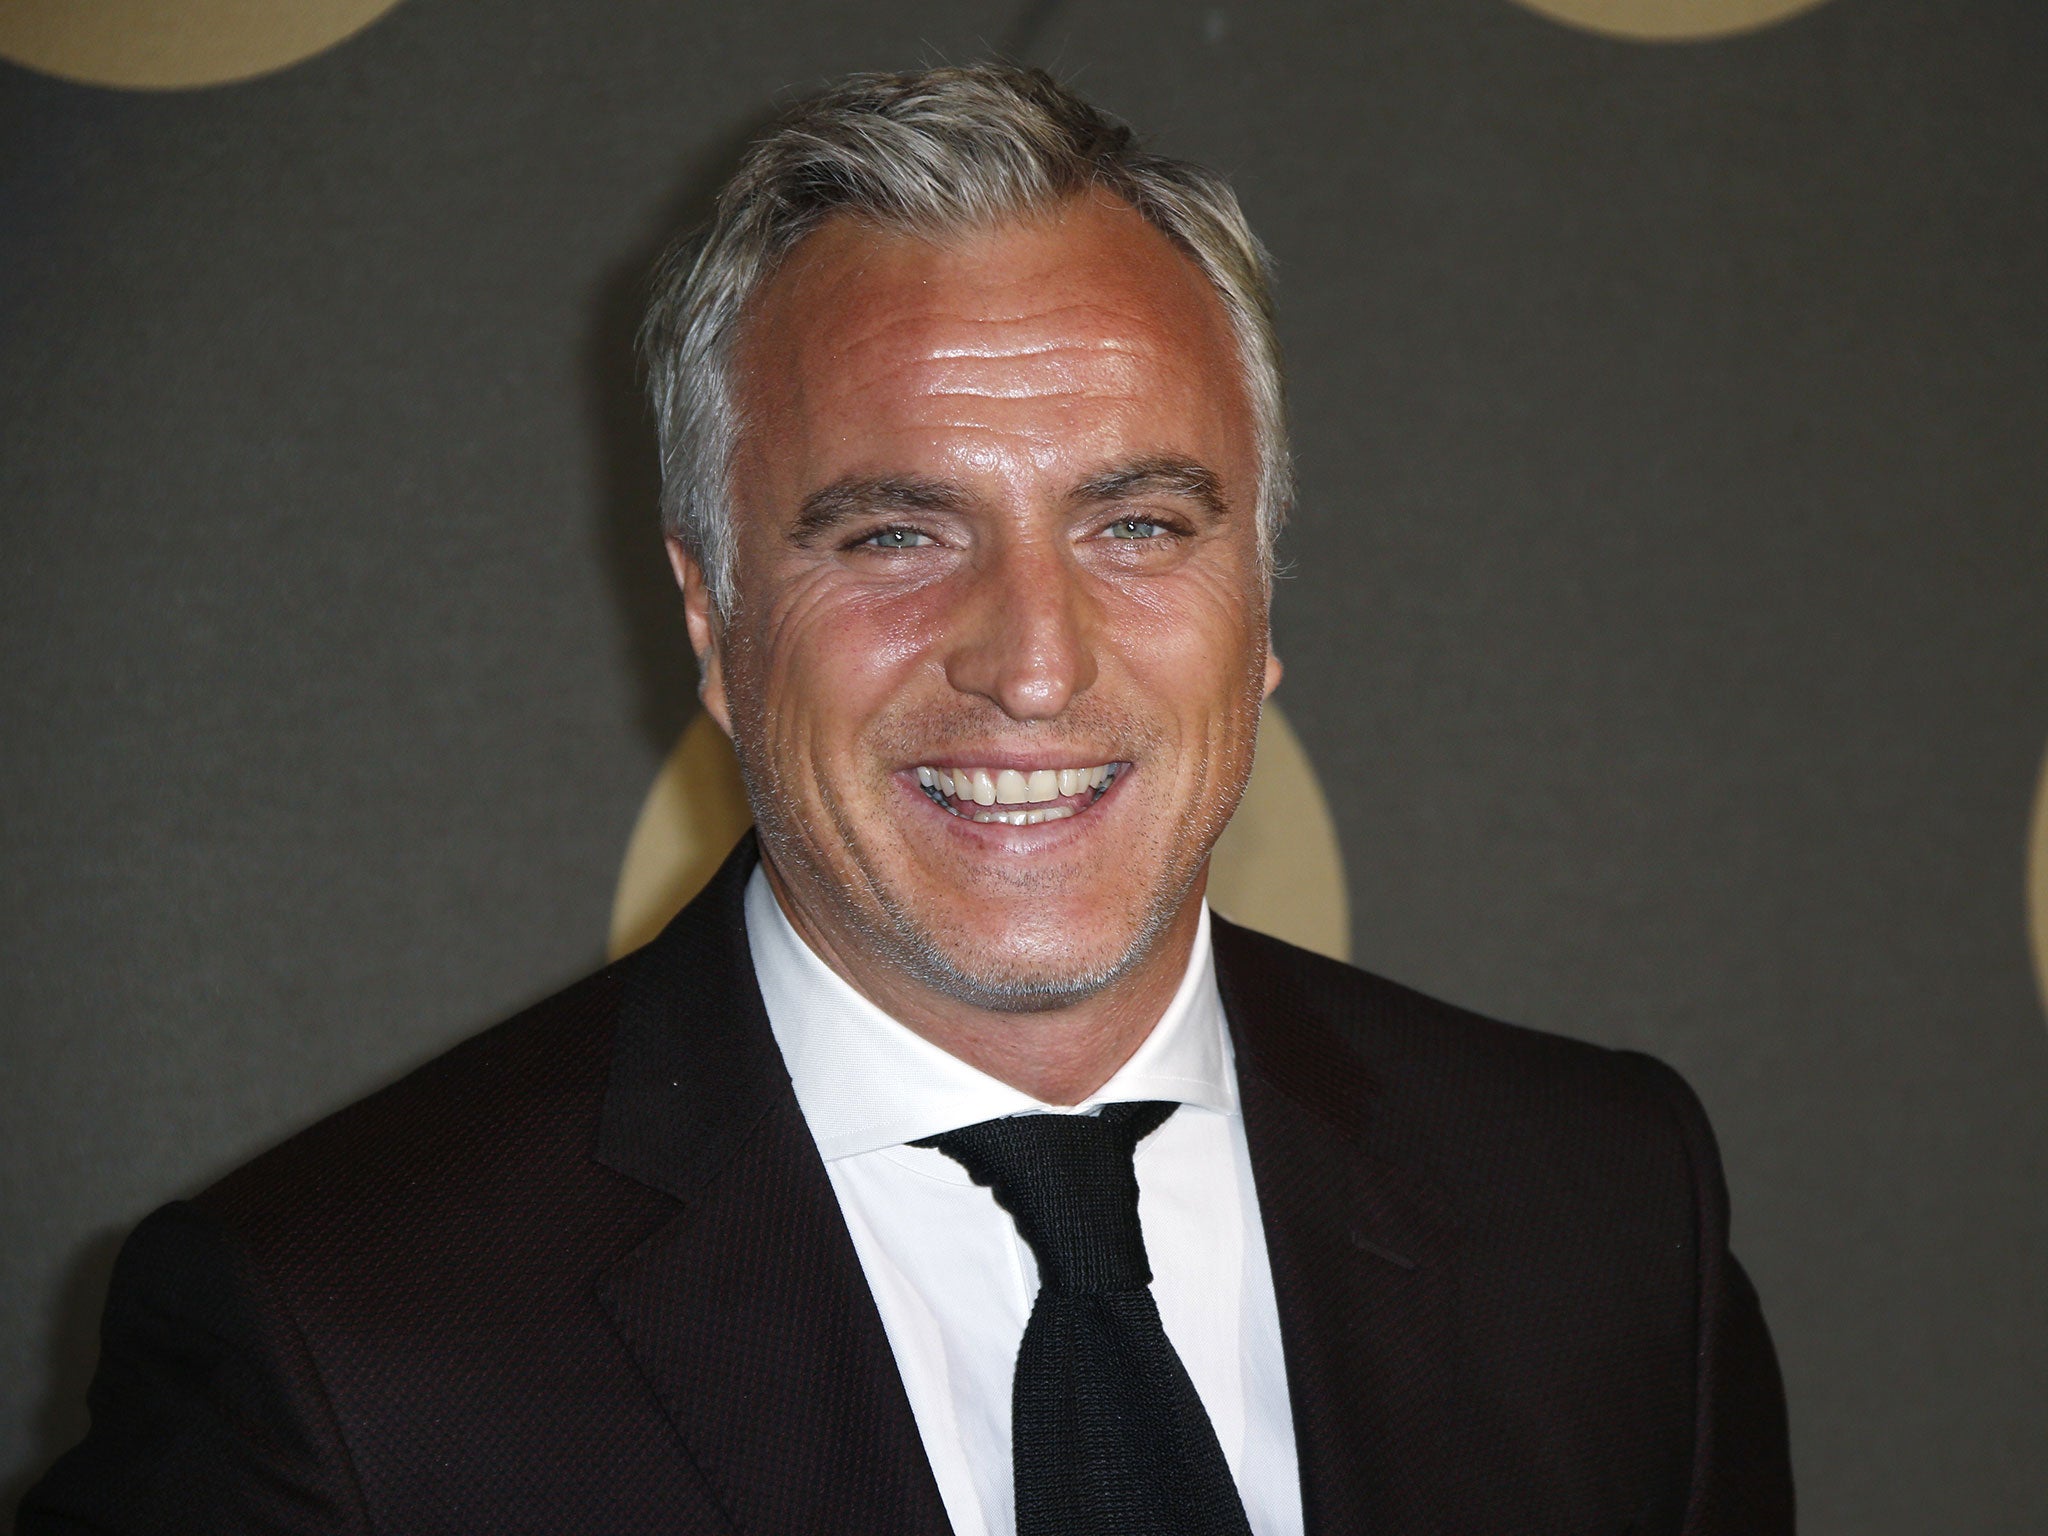 David Ginola has recently announced that he’s becoming a father again at 51